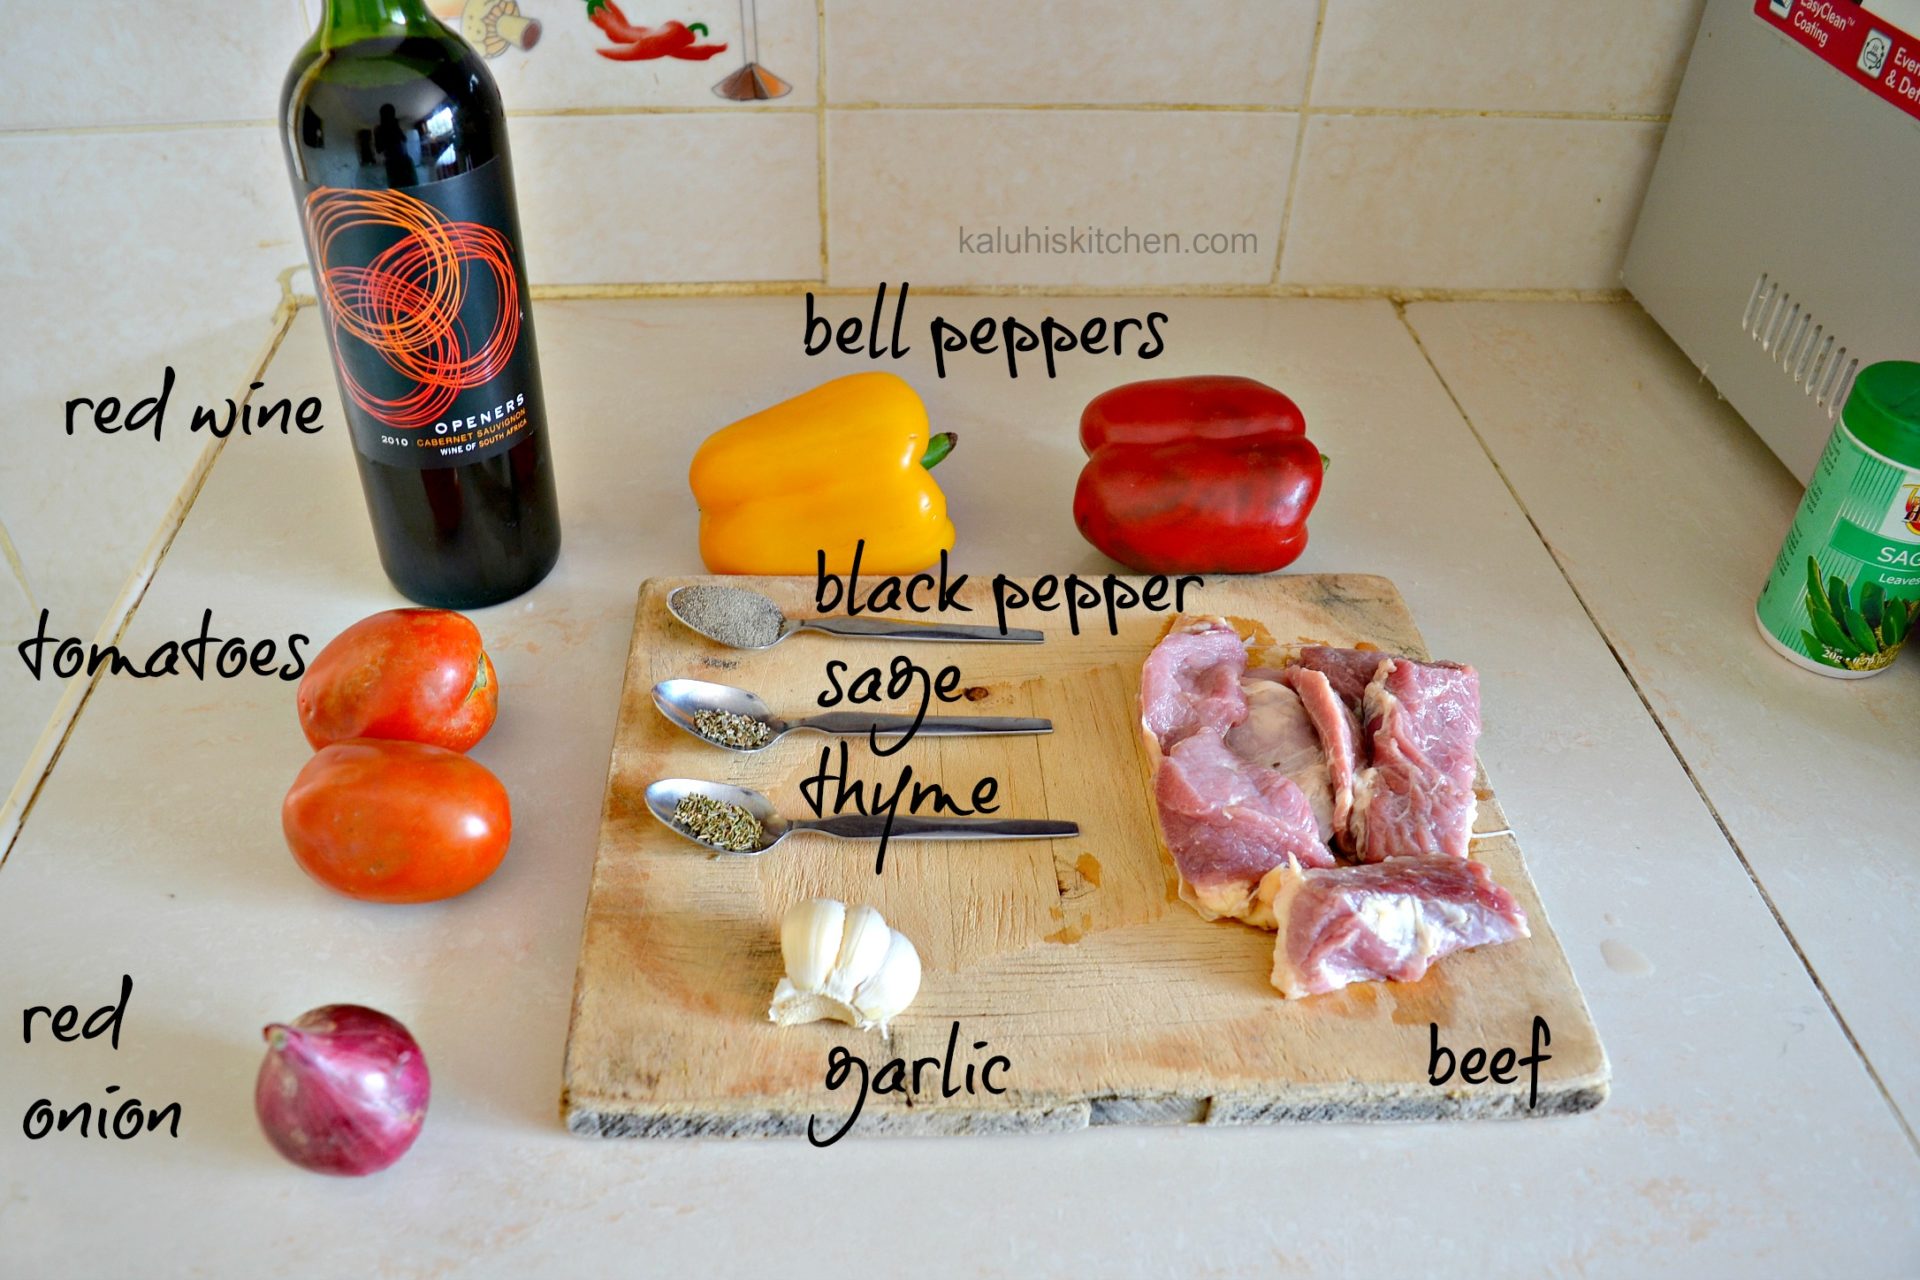 red-wine-beef-dry-fry-ingredeints_beef-recipes_how-to-cook-meat-with-red-wine_kaluhiskitchen.com_.jpg